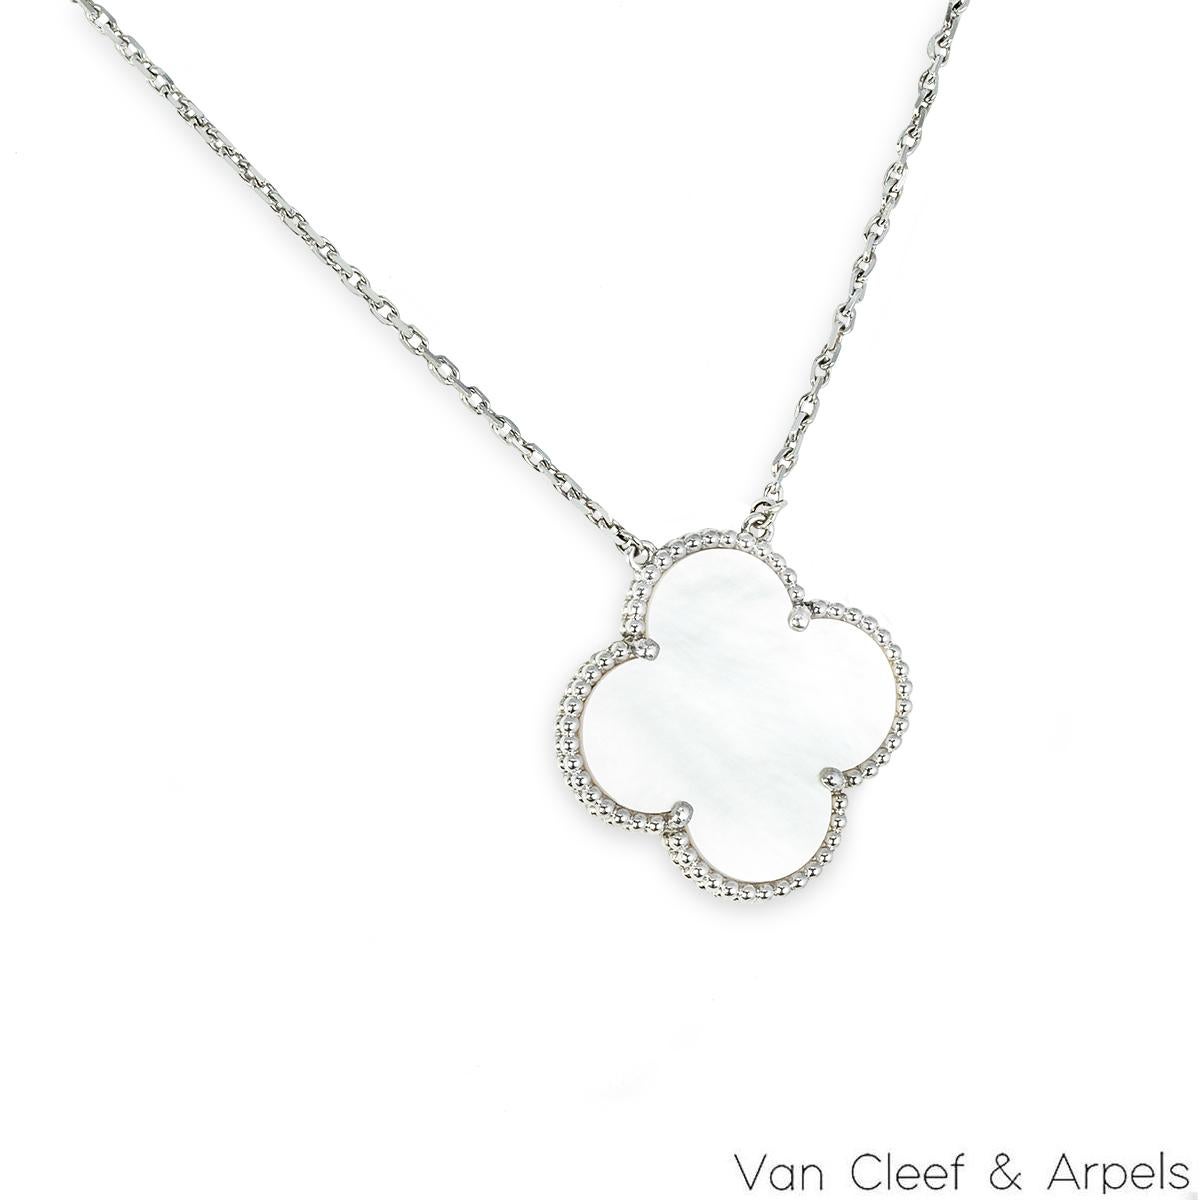 A gorgeous 18k white gold mother of pearl necklace by Van Cleef & Arpels from the Magic Alhambra collection. The necklace comprises of the iconic 4-leaf clover motif pendant set with a mother of pearl inlay and complemented with a beaded edge. The